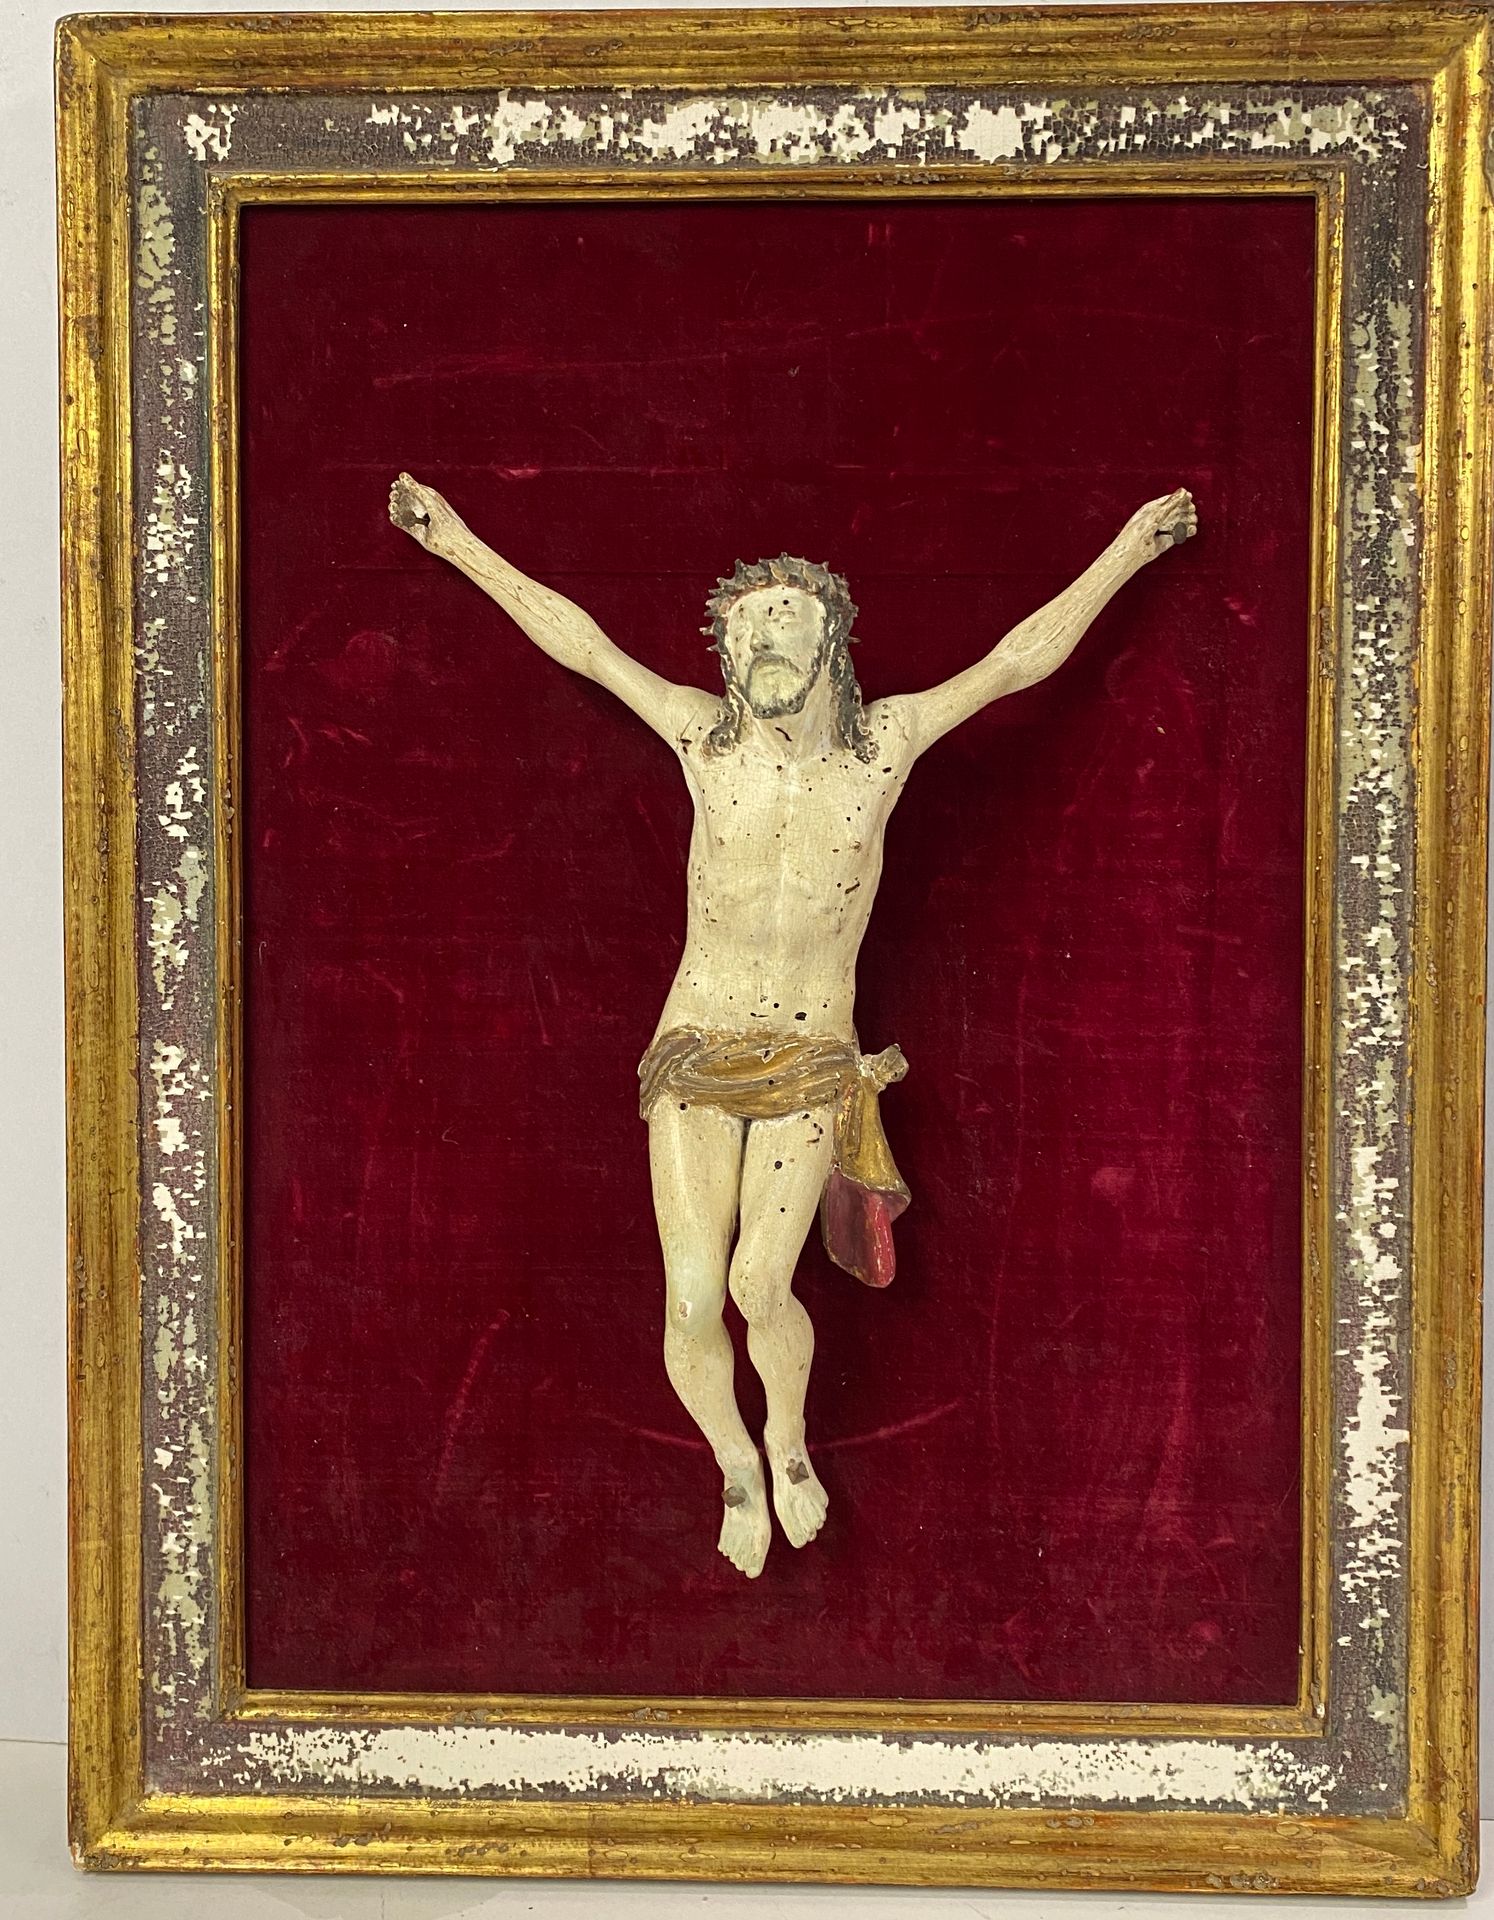 Null Christ in polychrome wood

H. 30cm